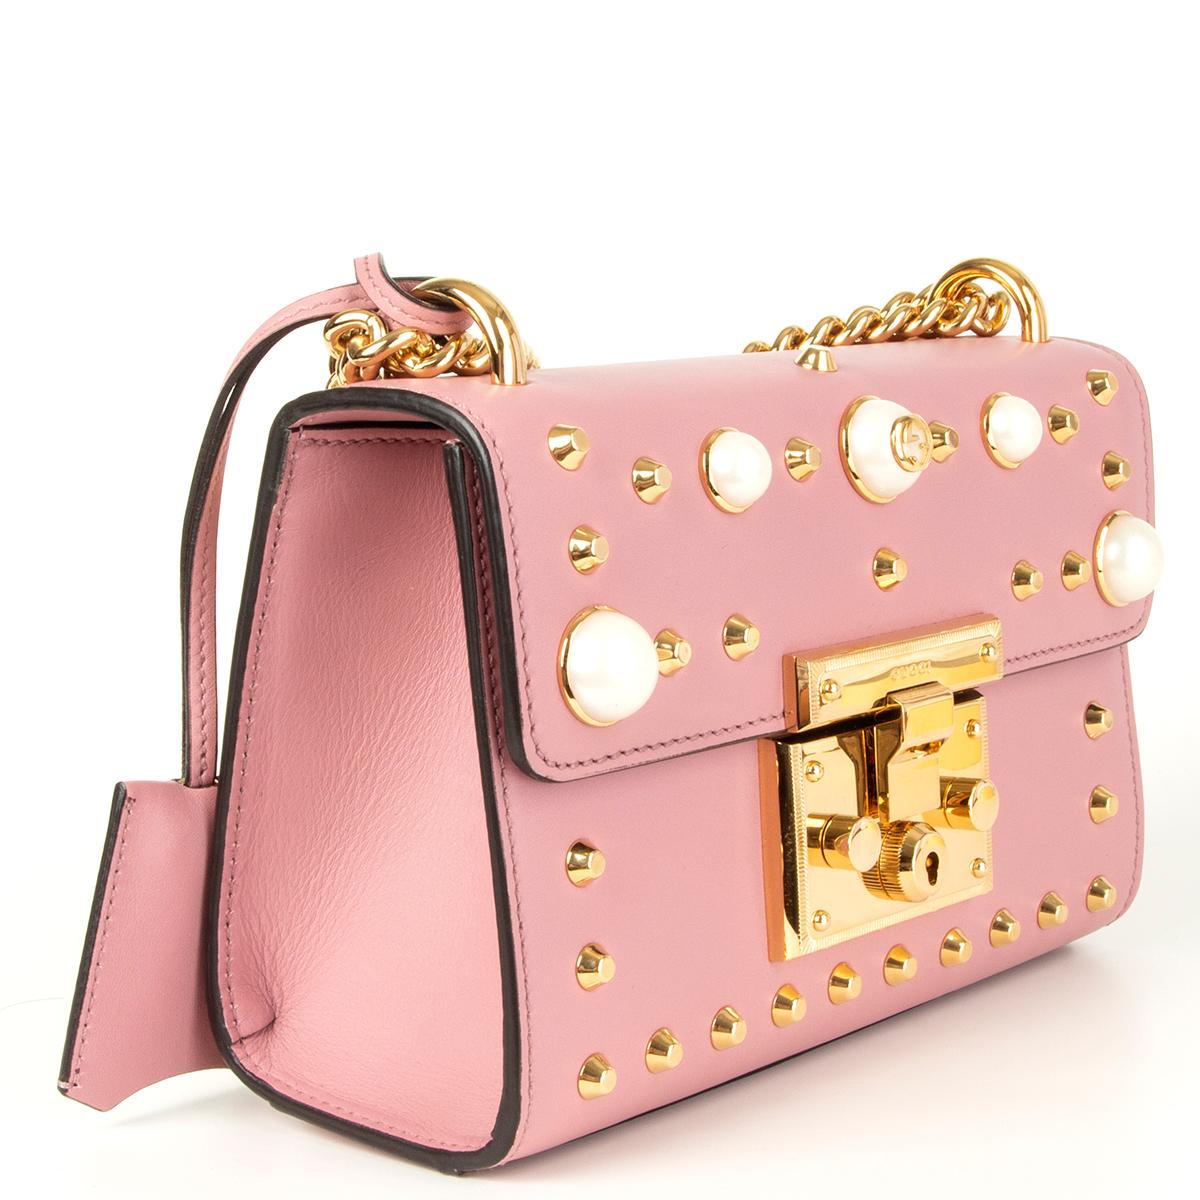 Gucci 'Padlock Small' shoulder bag in baby pink calfskin embellished with pearls and gold-tone metal studds. Lined in tan suede with one open pocket against the back. Has ben carried and is in excellent condition. 

Height 15cm (5.9in)
Width 20cm